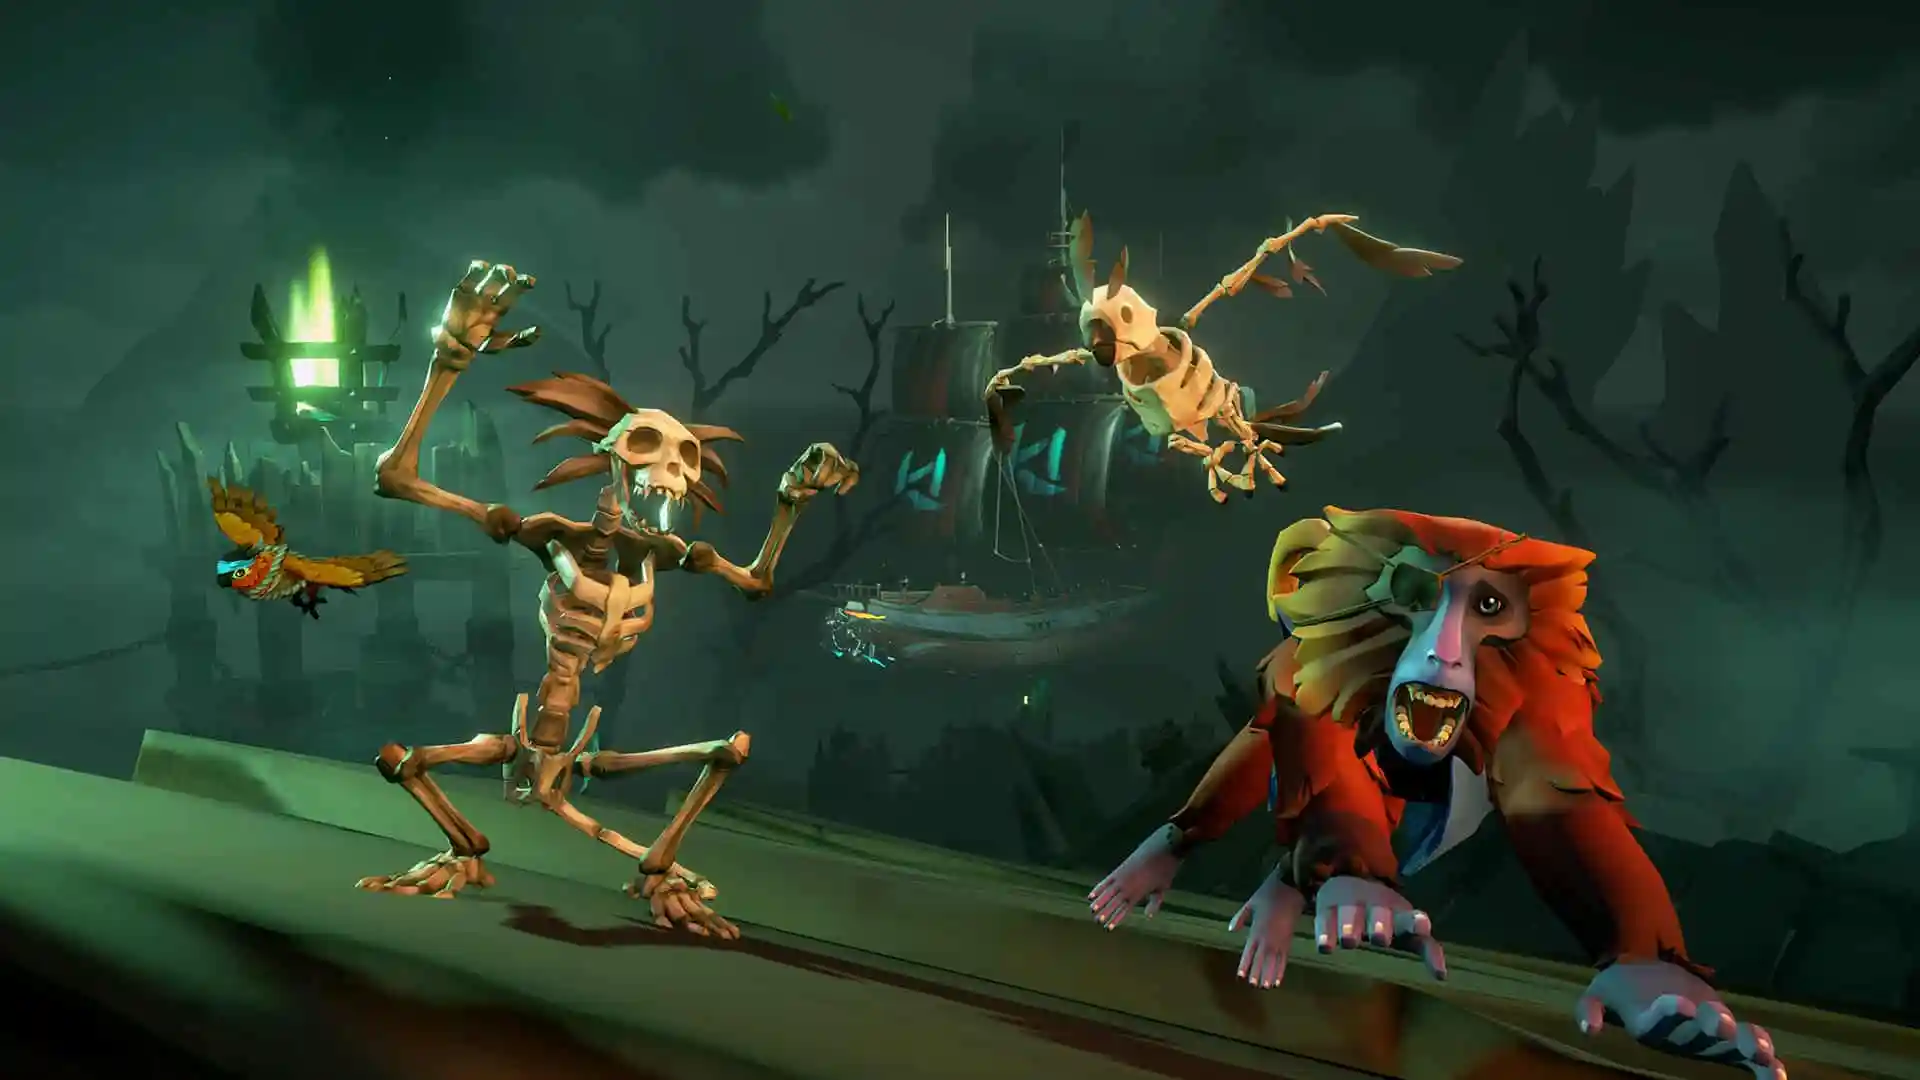 Microsoft Rare Sea of Thieves Tall Tales reimagines video game narrative storytelling with live cutscenes and lived-in experience